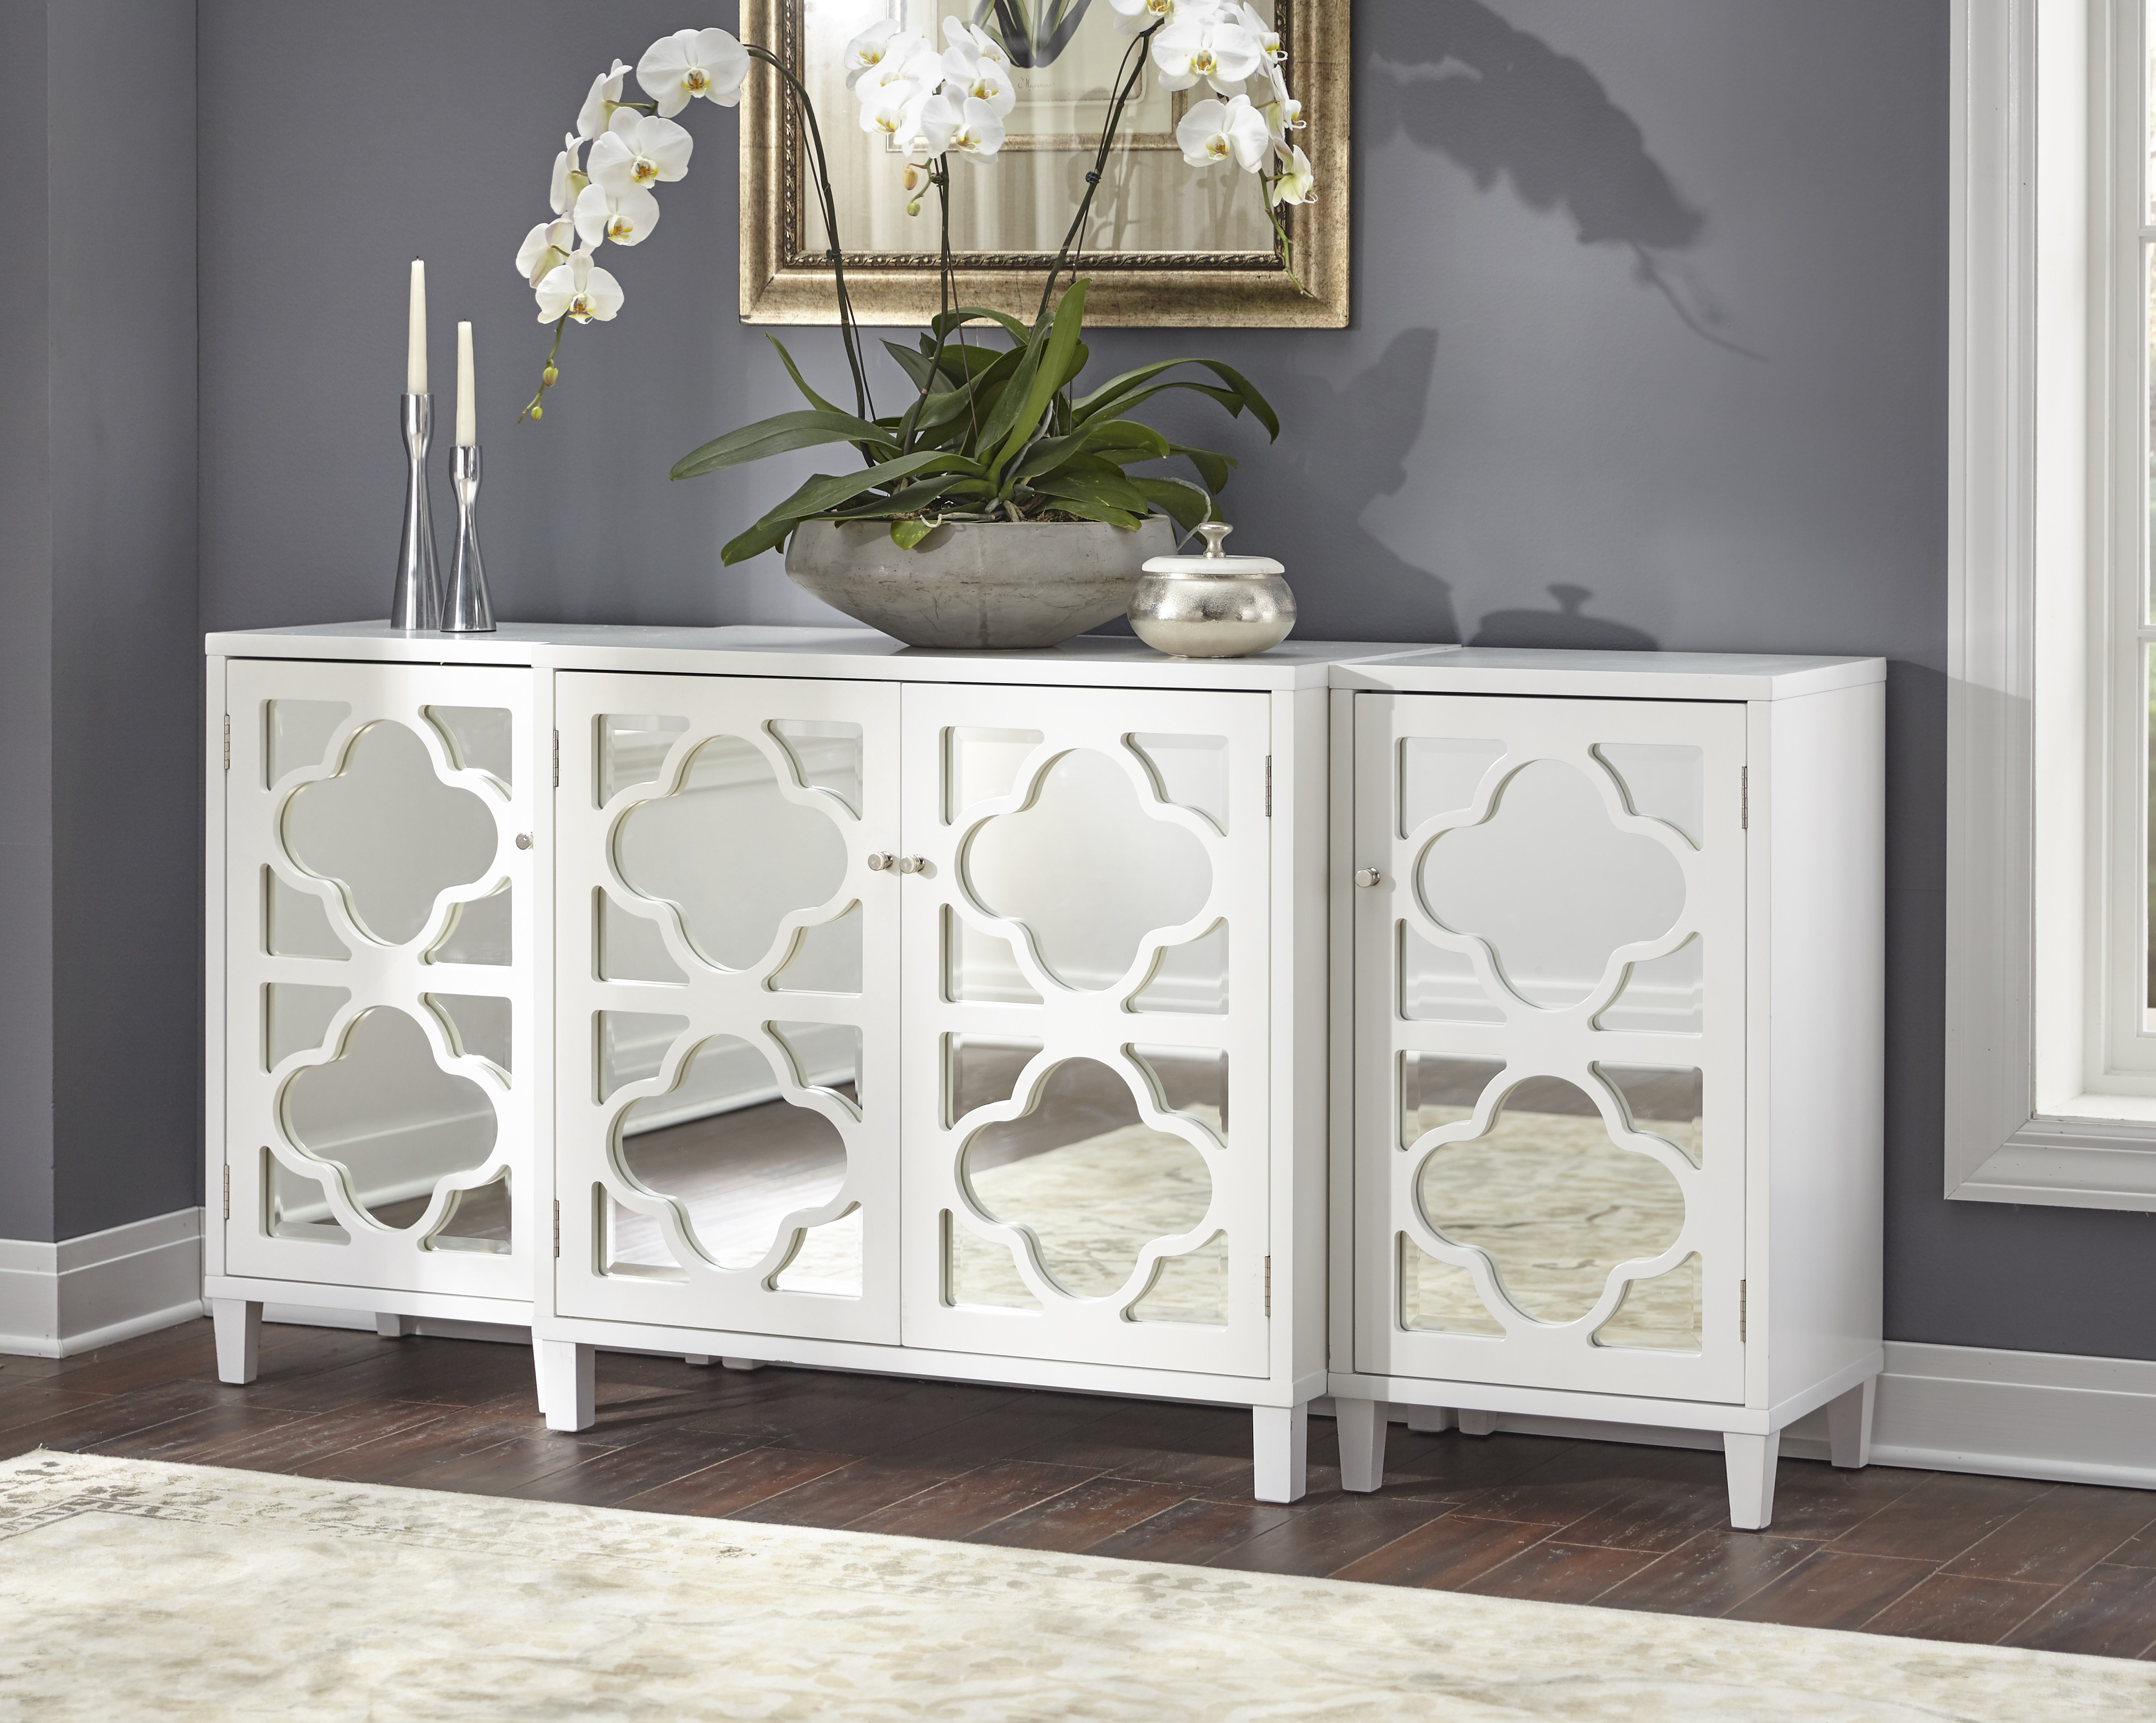 mirrored dining room cabinet